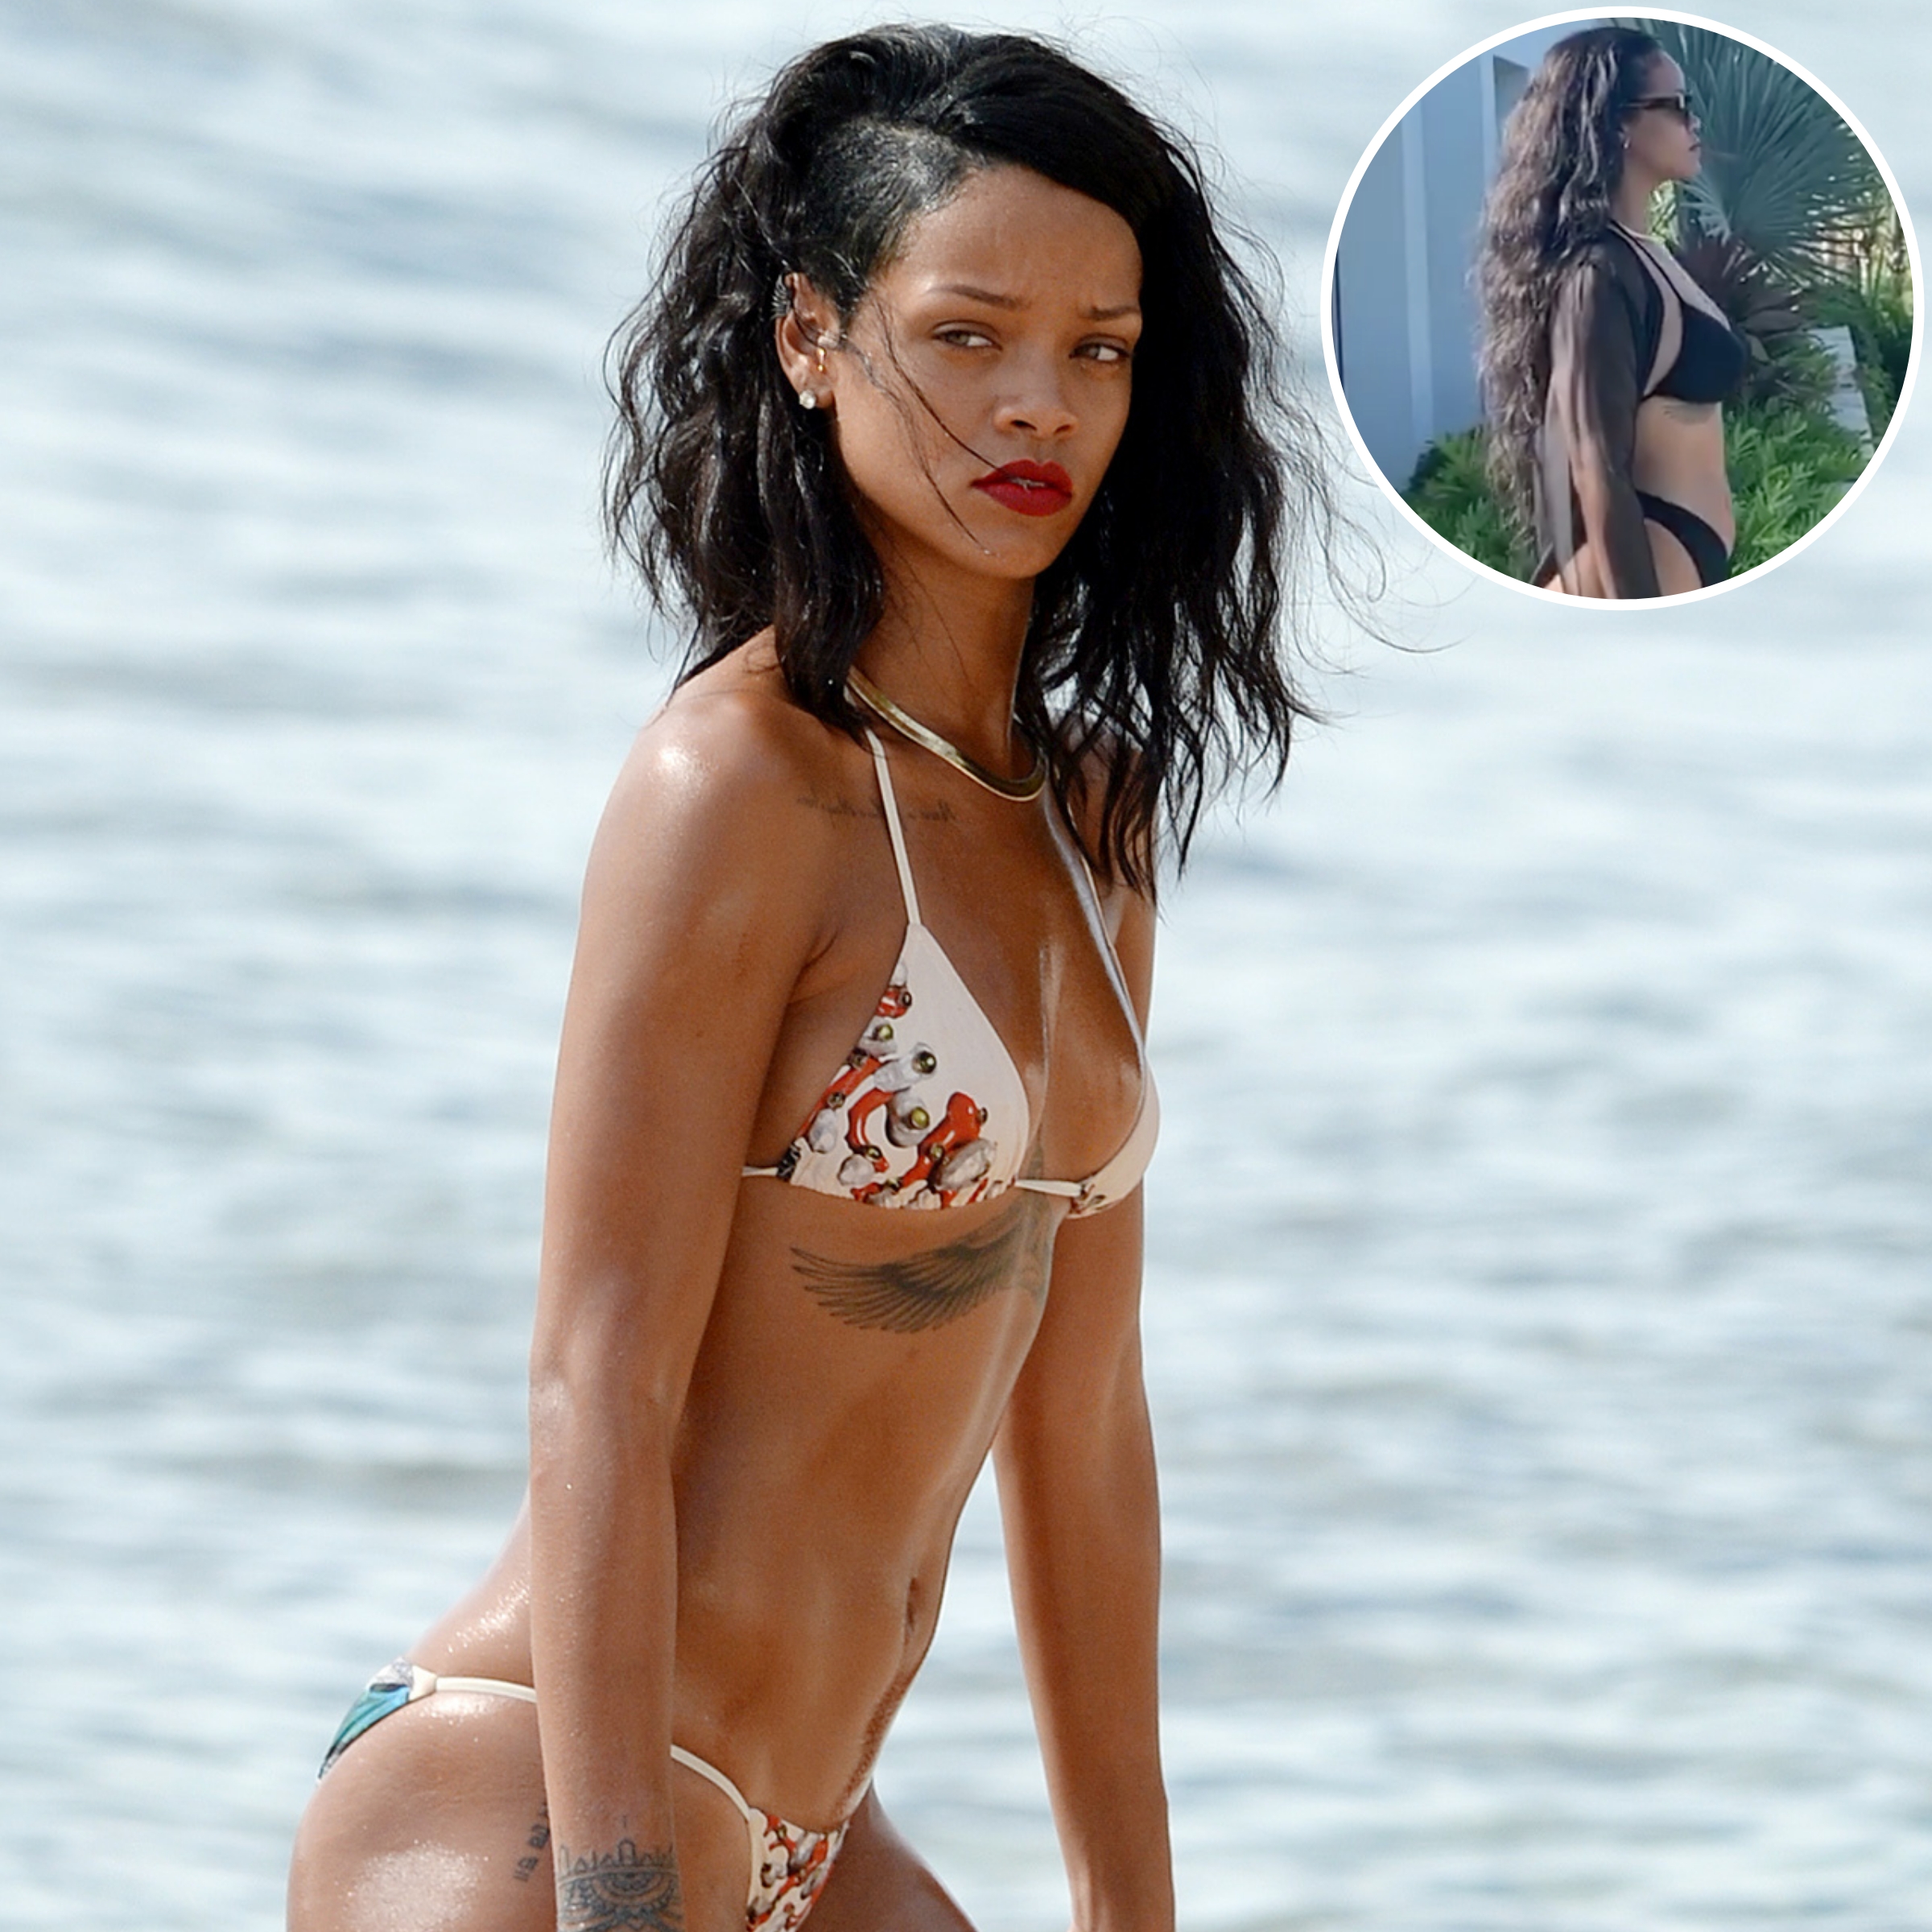 Rihanna's Sexy Bikini Photos: Pictures of the Singer in a Swimsuit